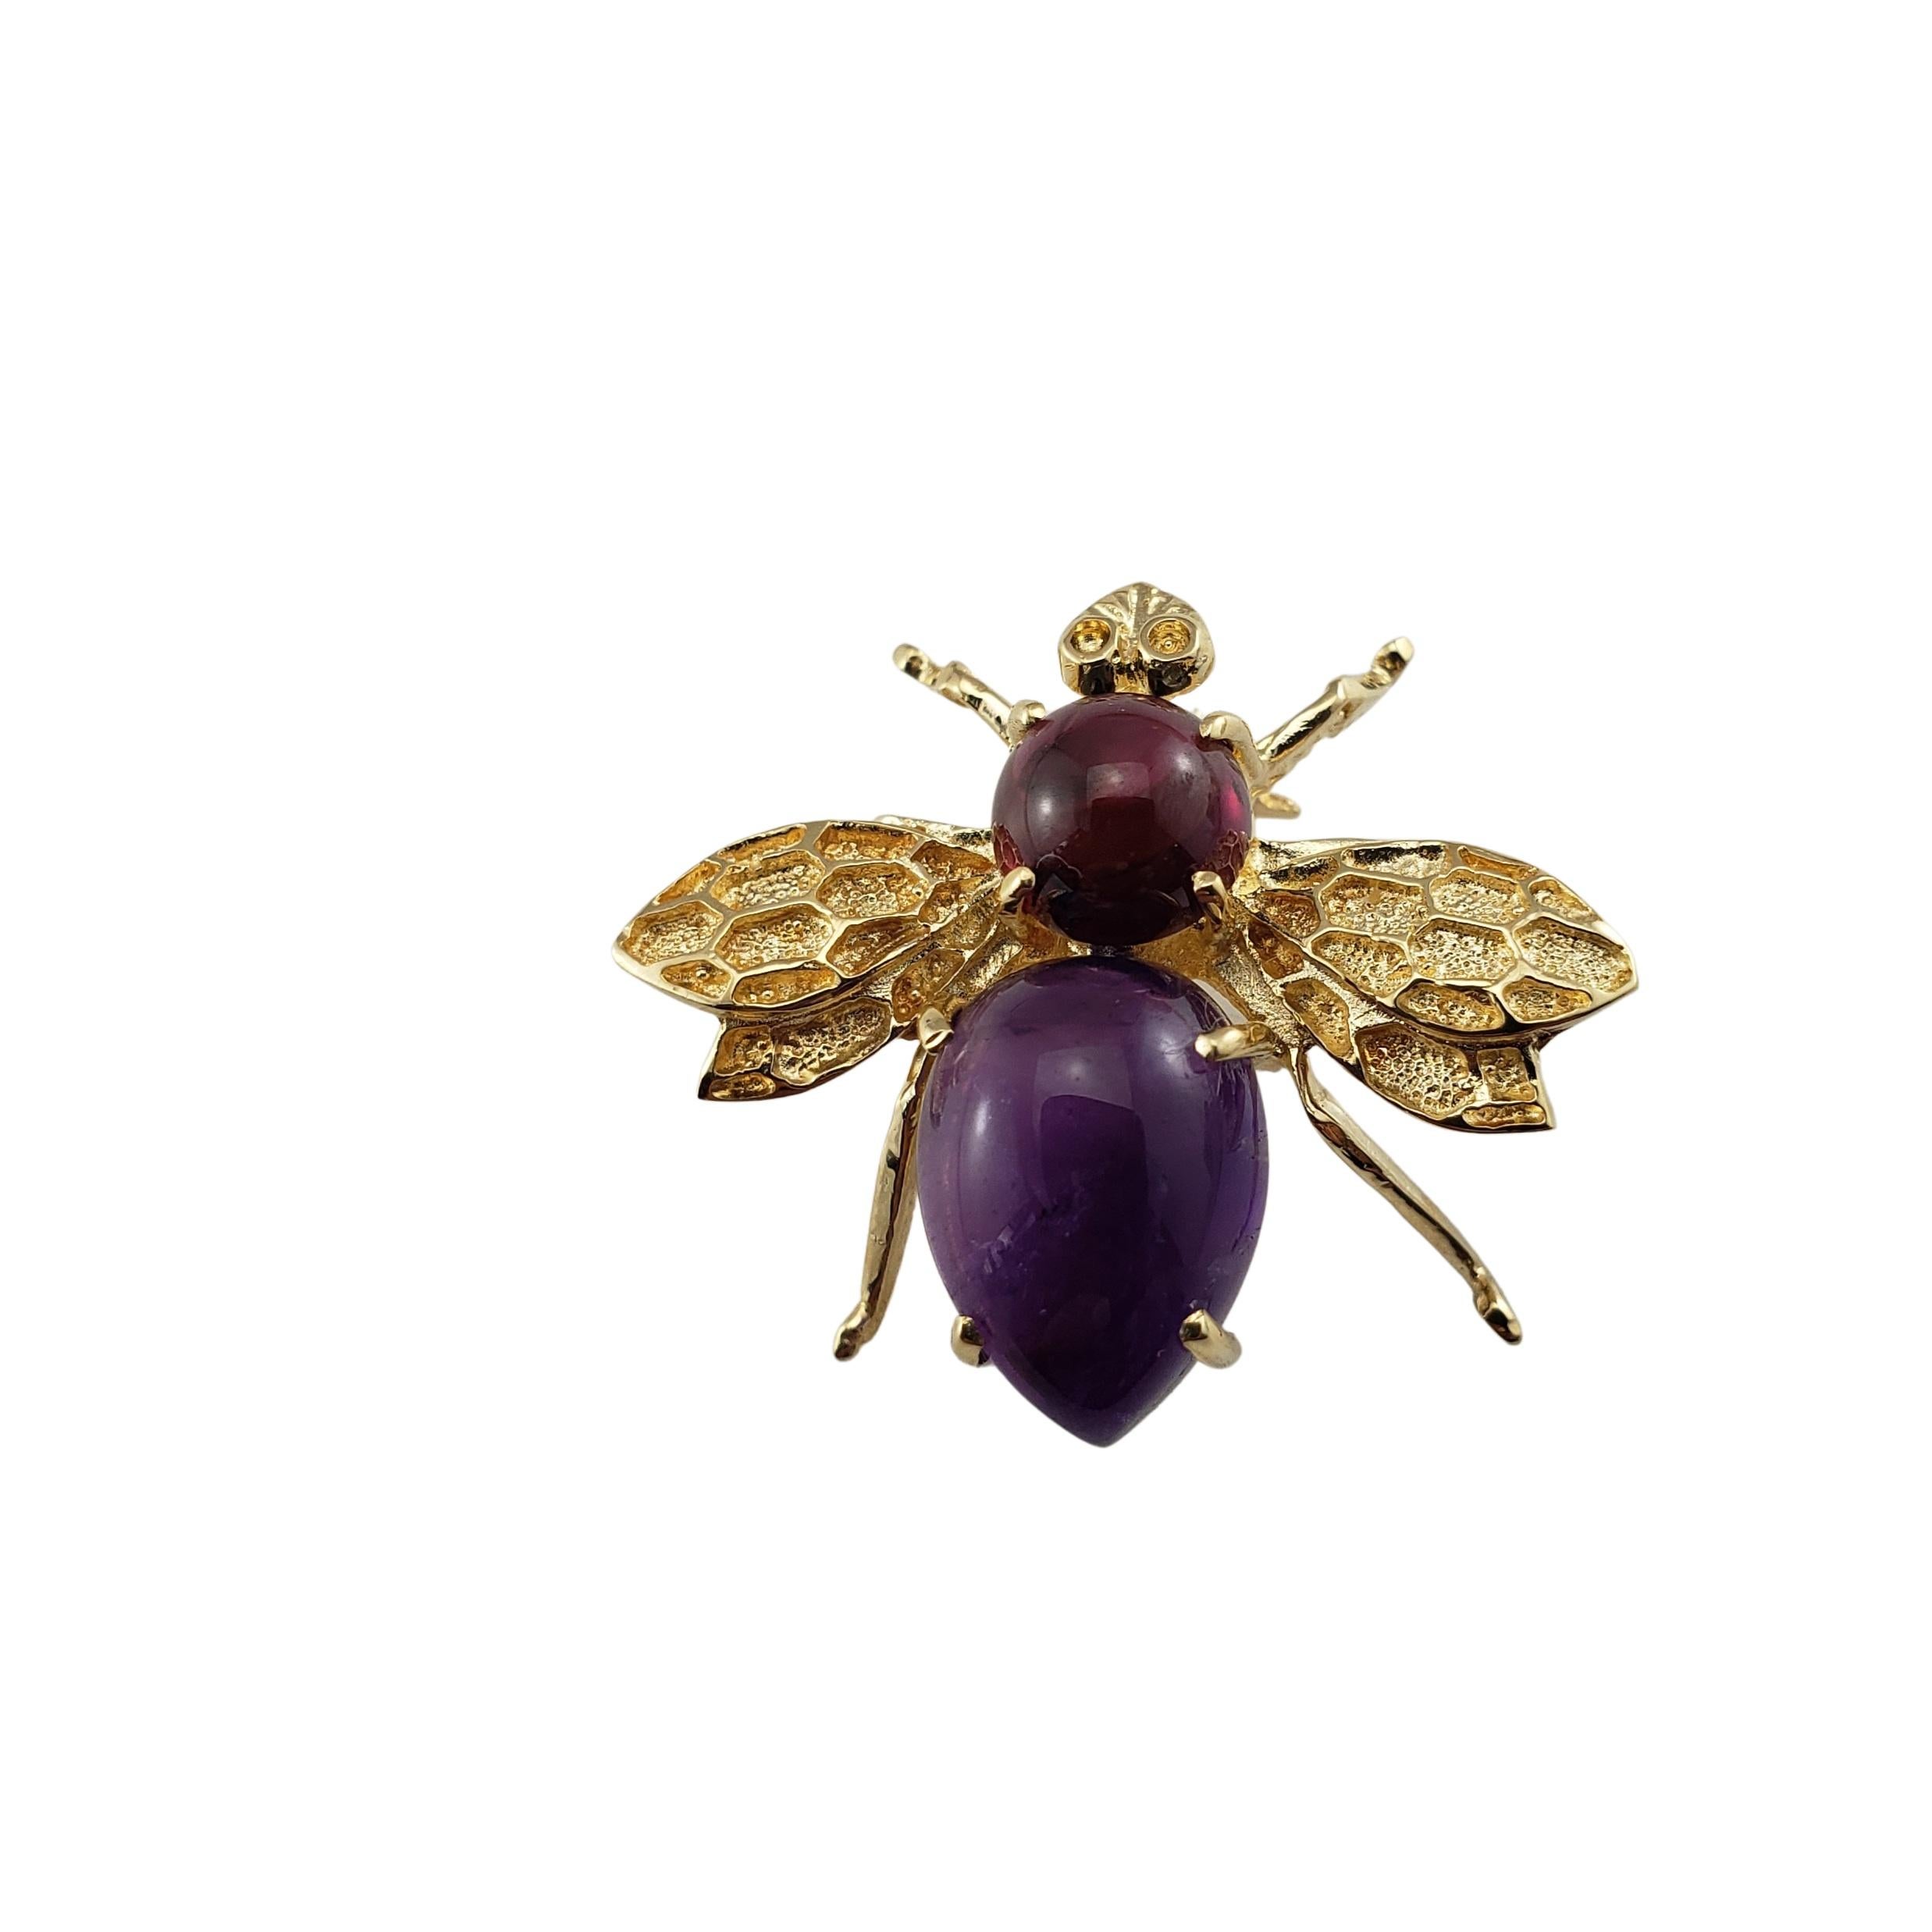 Vintage 14 Karat Yellow Gold Garnet and Amethyst Bee Pin/Brooch-

This lovely bee pin features one round cabochon garnet (6 mm) and one oval cabochon amethyst (12 mm x 8 mm) set in beautifully detailed 14K yellow gold.

Size:  20 mm x 24 mm

Weight: